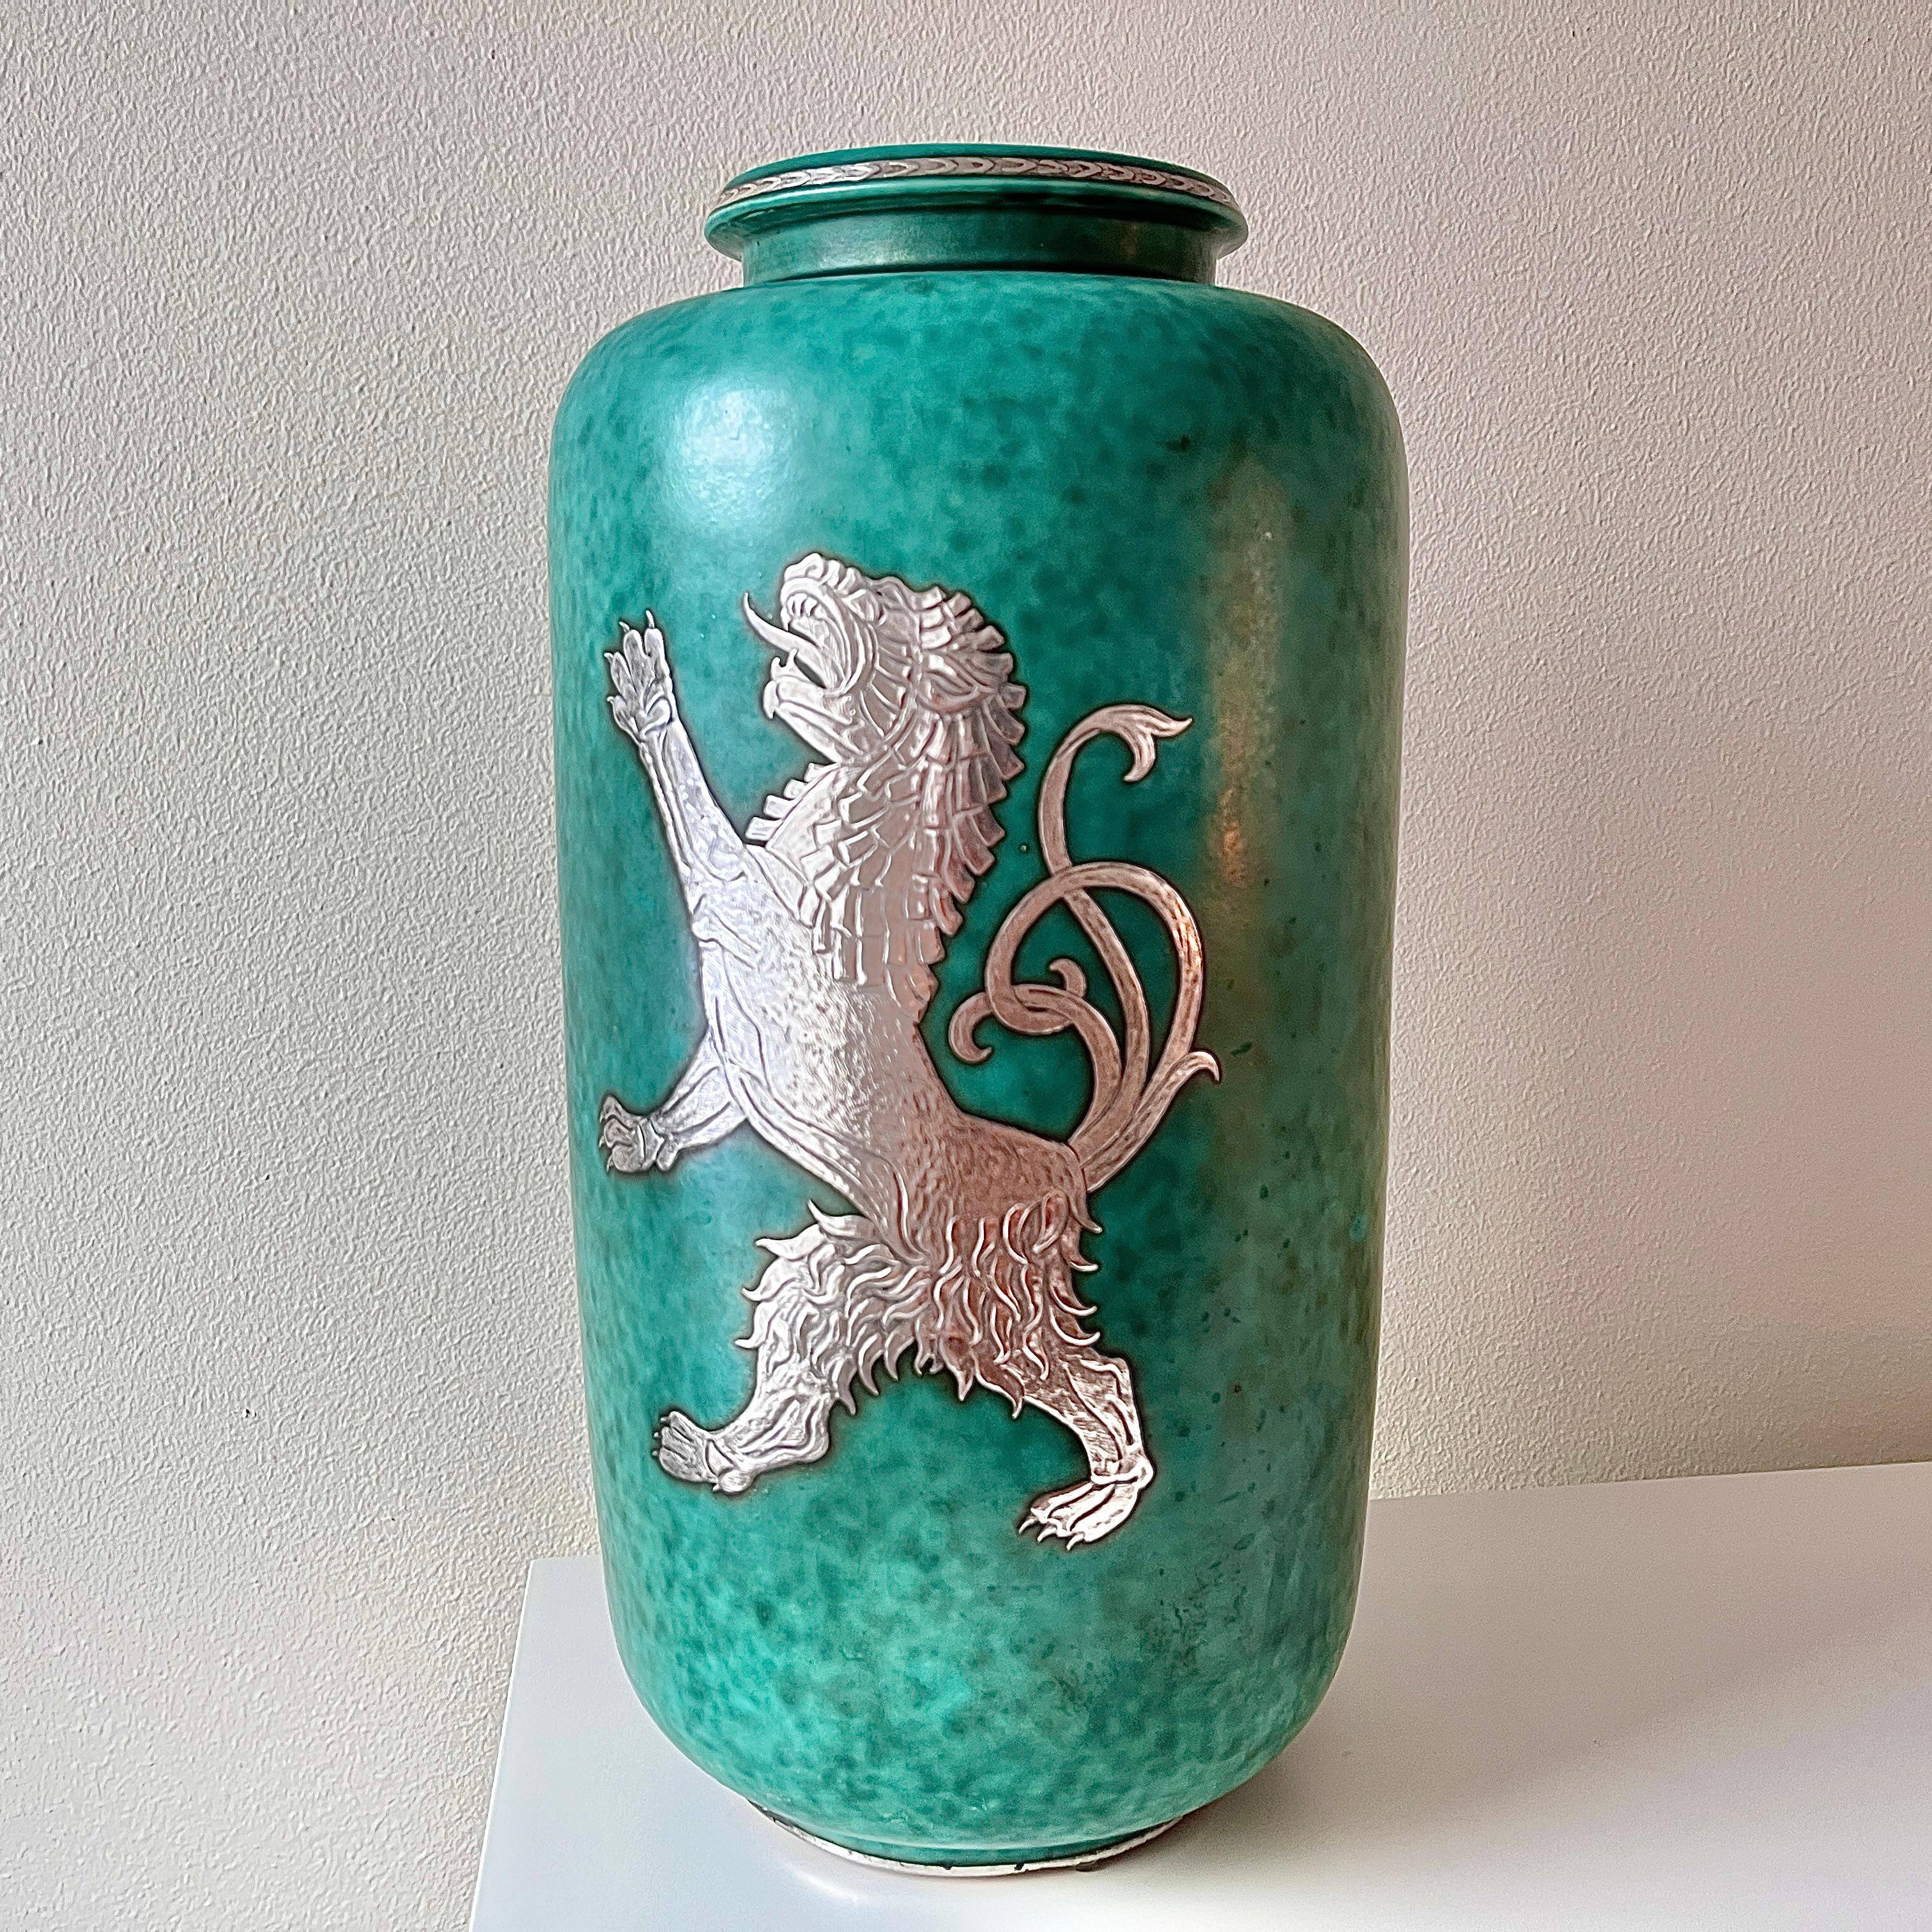 Monumental stoneware vase designed by Wilhelm Kåge from the ‘Argenta’ series for Gustavsberg, Sweden, 1930s. Signature green glaze with decor of a mythical lion, (typical for the Swedish grace period) and stripes at the rim and base in